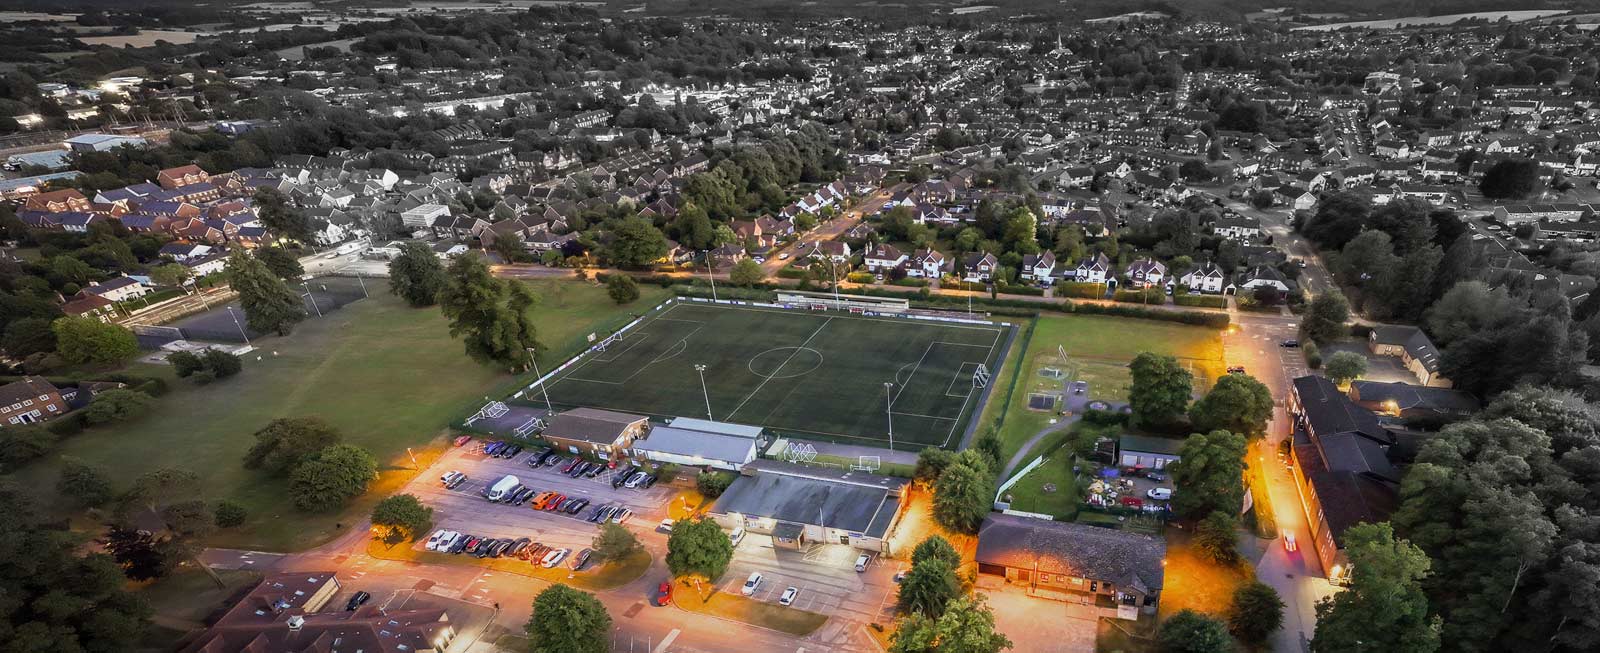 Alton FC Aerial Photo by wemakepictures.co.uk